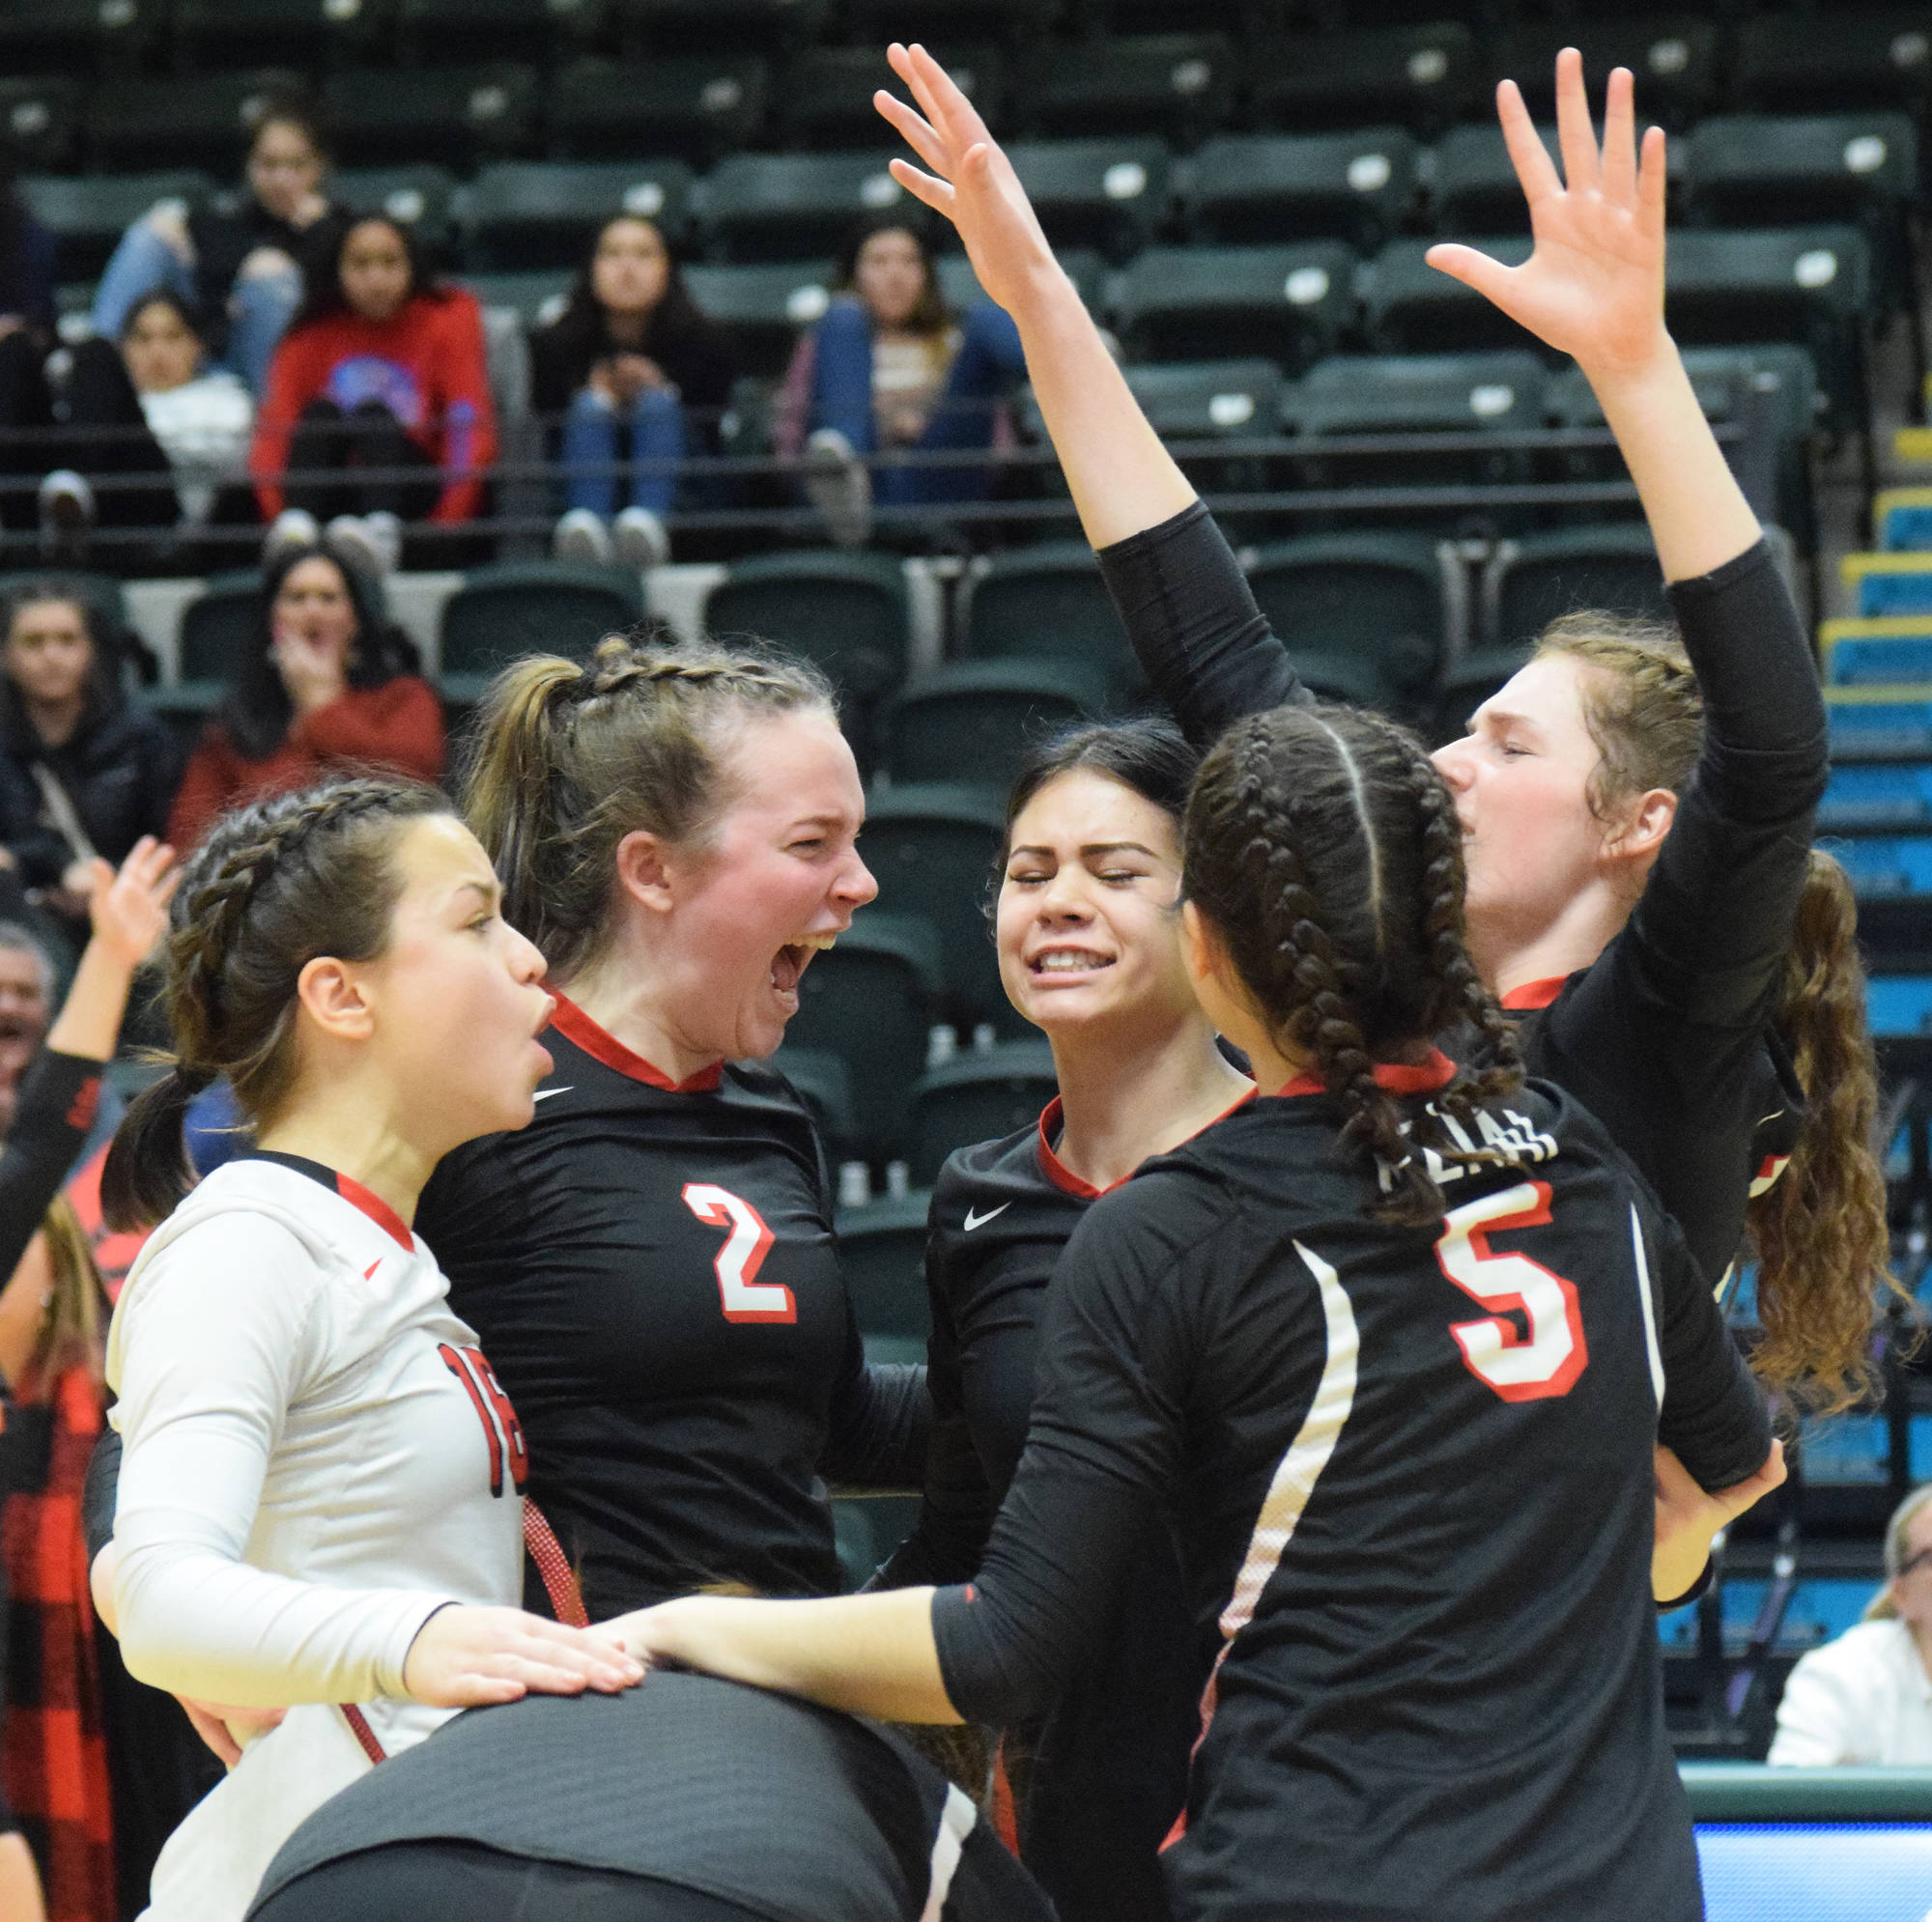 Kenai Central players celebrate a point Saturday, Nov. 16, 2019, against Homer at the Class 3A state volleyball tournament at the Alaska Airlines Center in Anchorage, Alaska. (Photo by Joey Klecka/Peninsula Clarion)